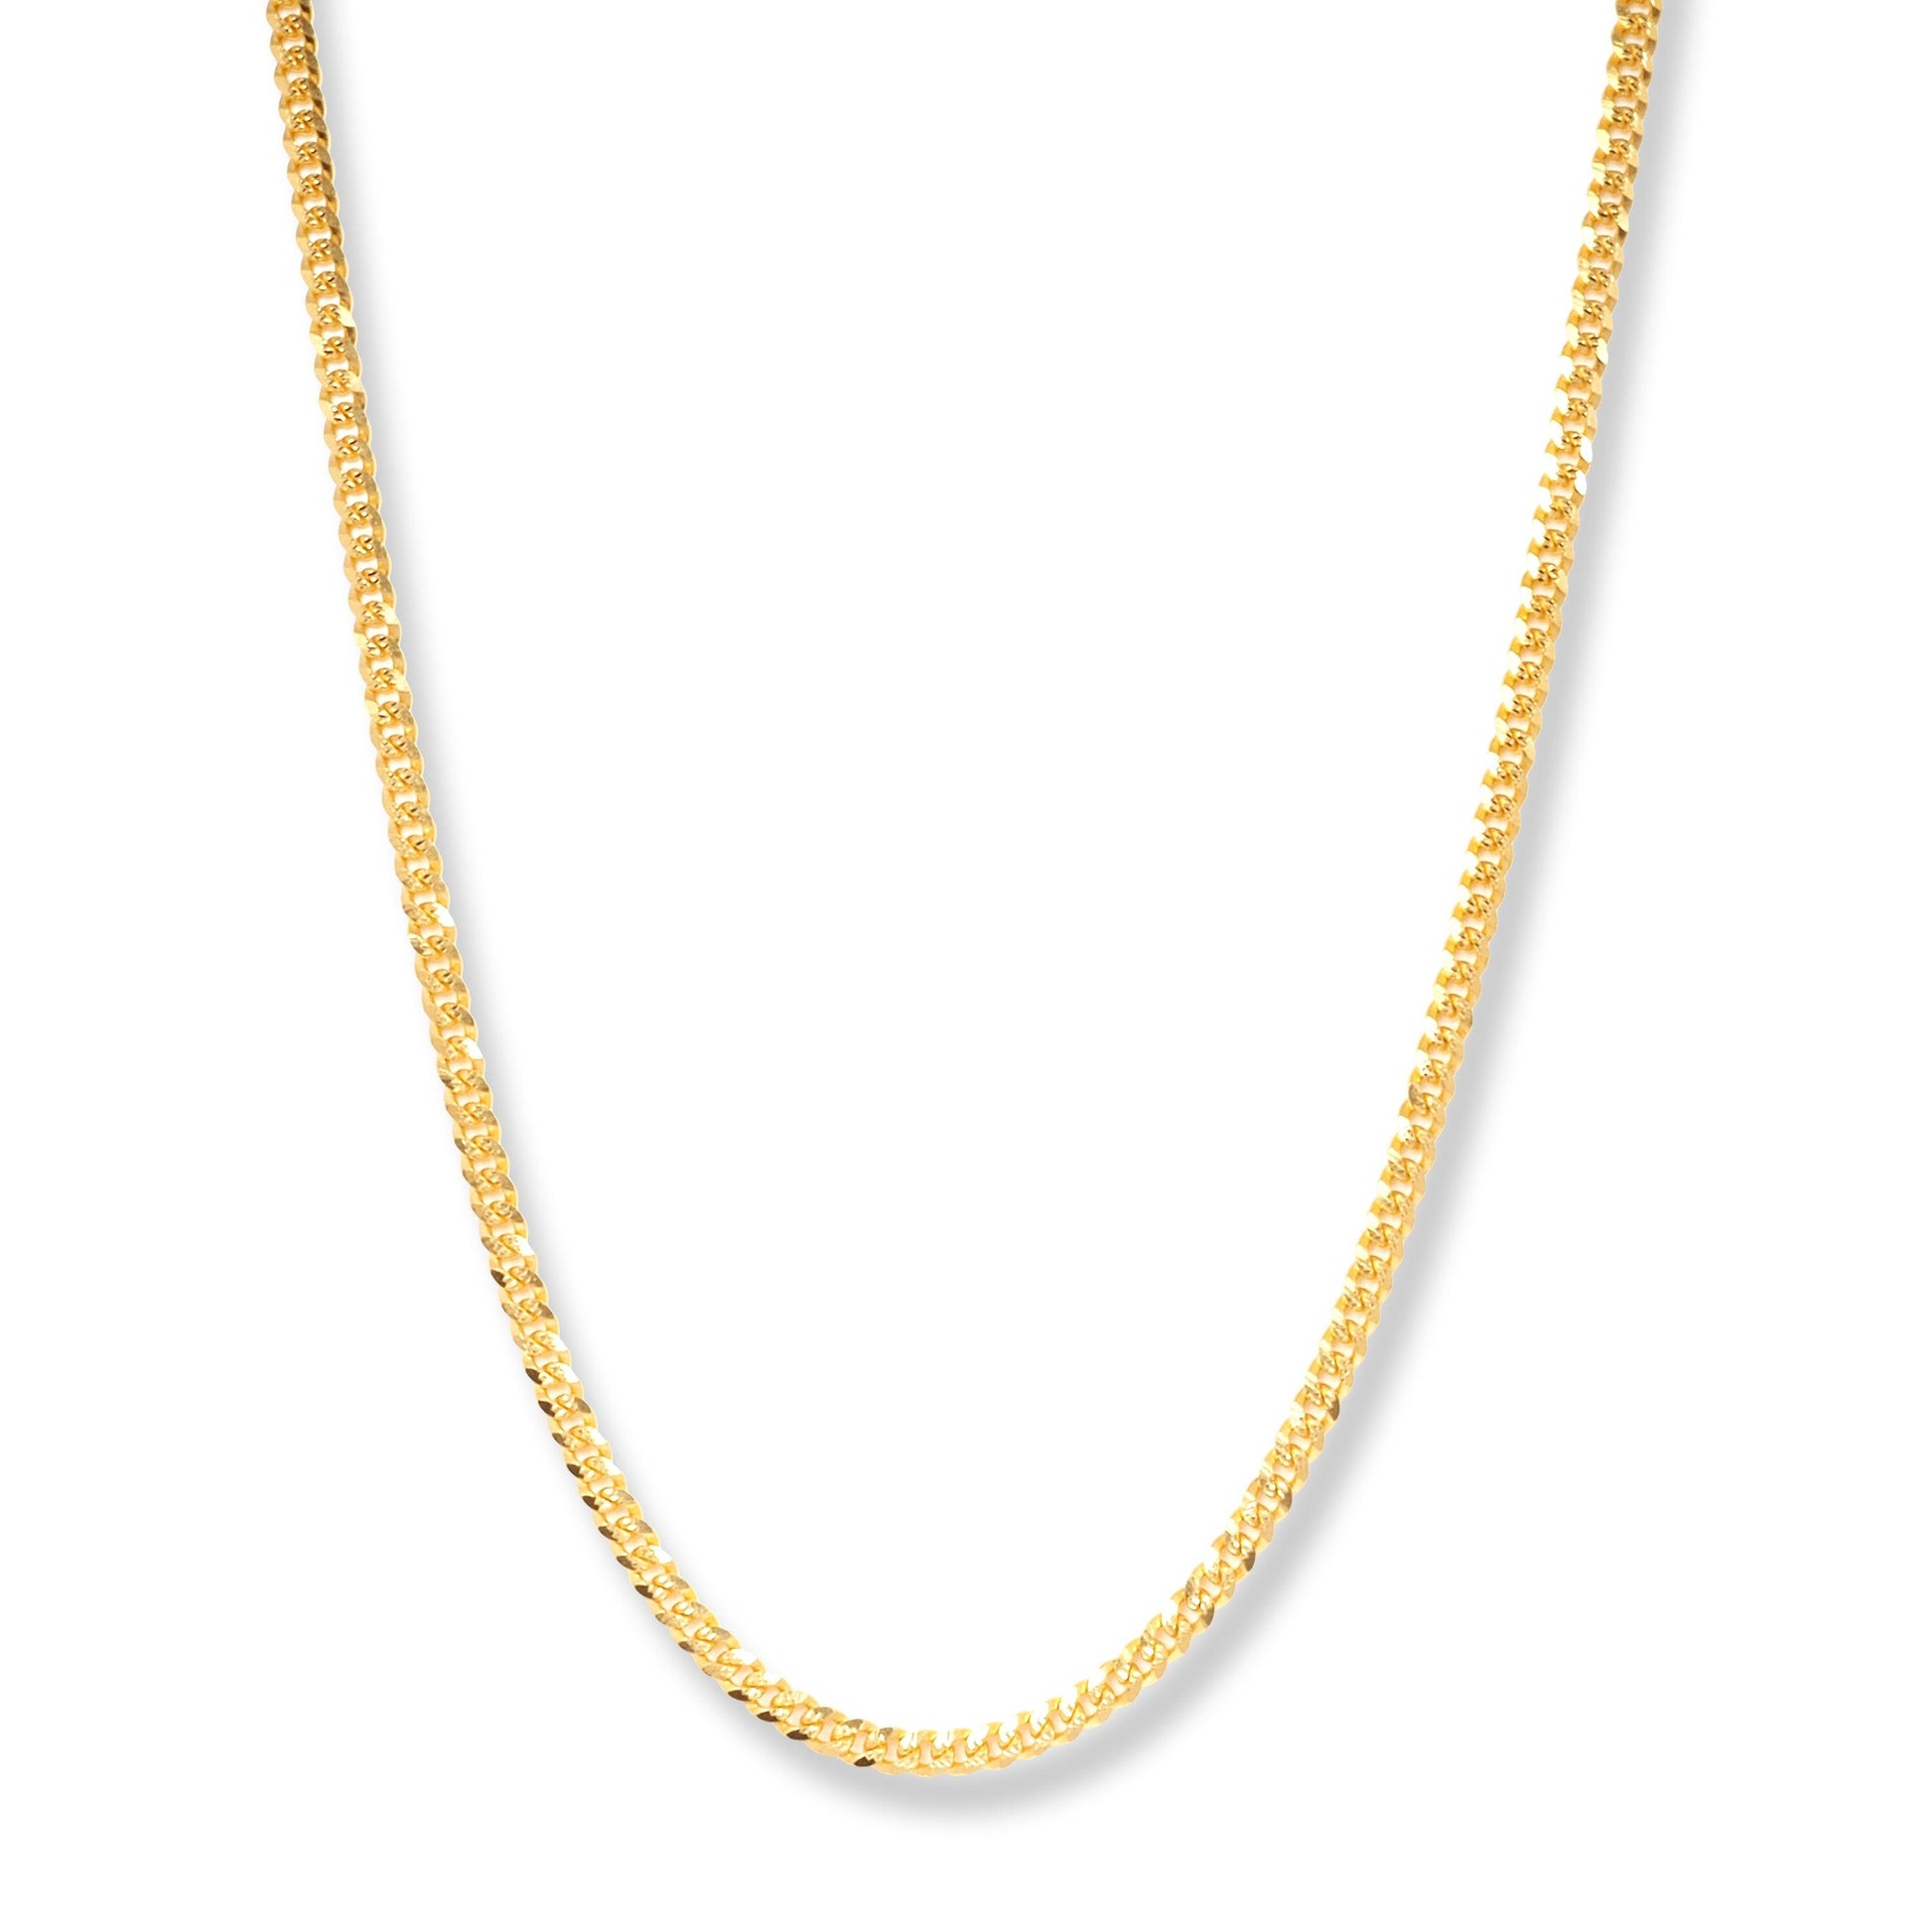 22ct Gold Curb Link Chain with Lobster Clasp C-7133 - Minar Jewellers